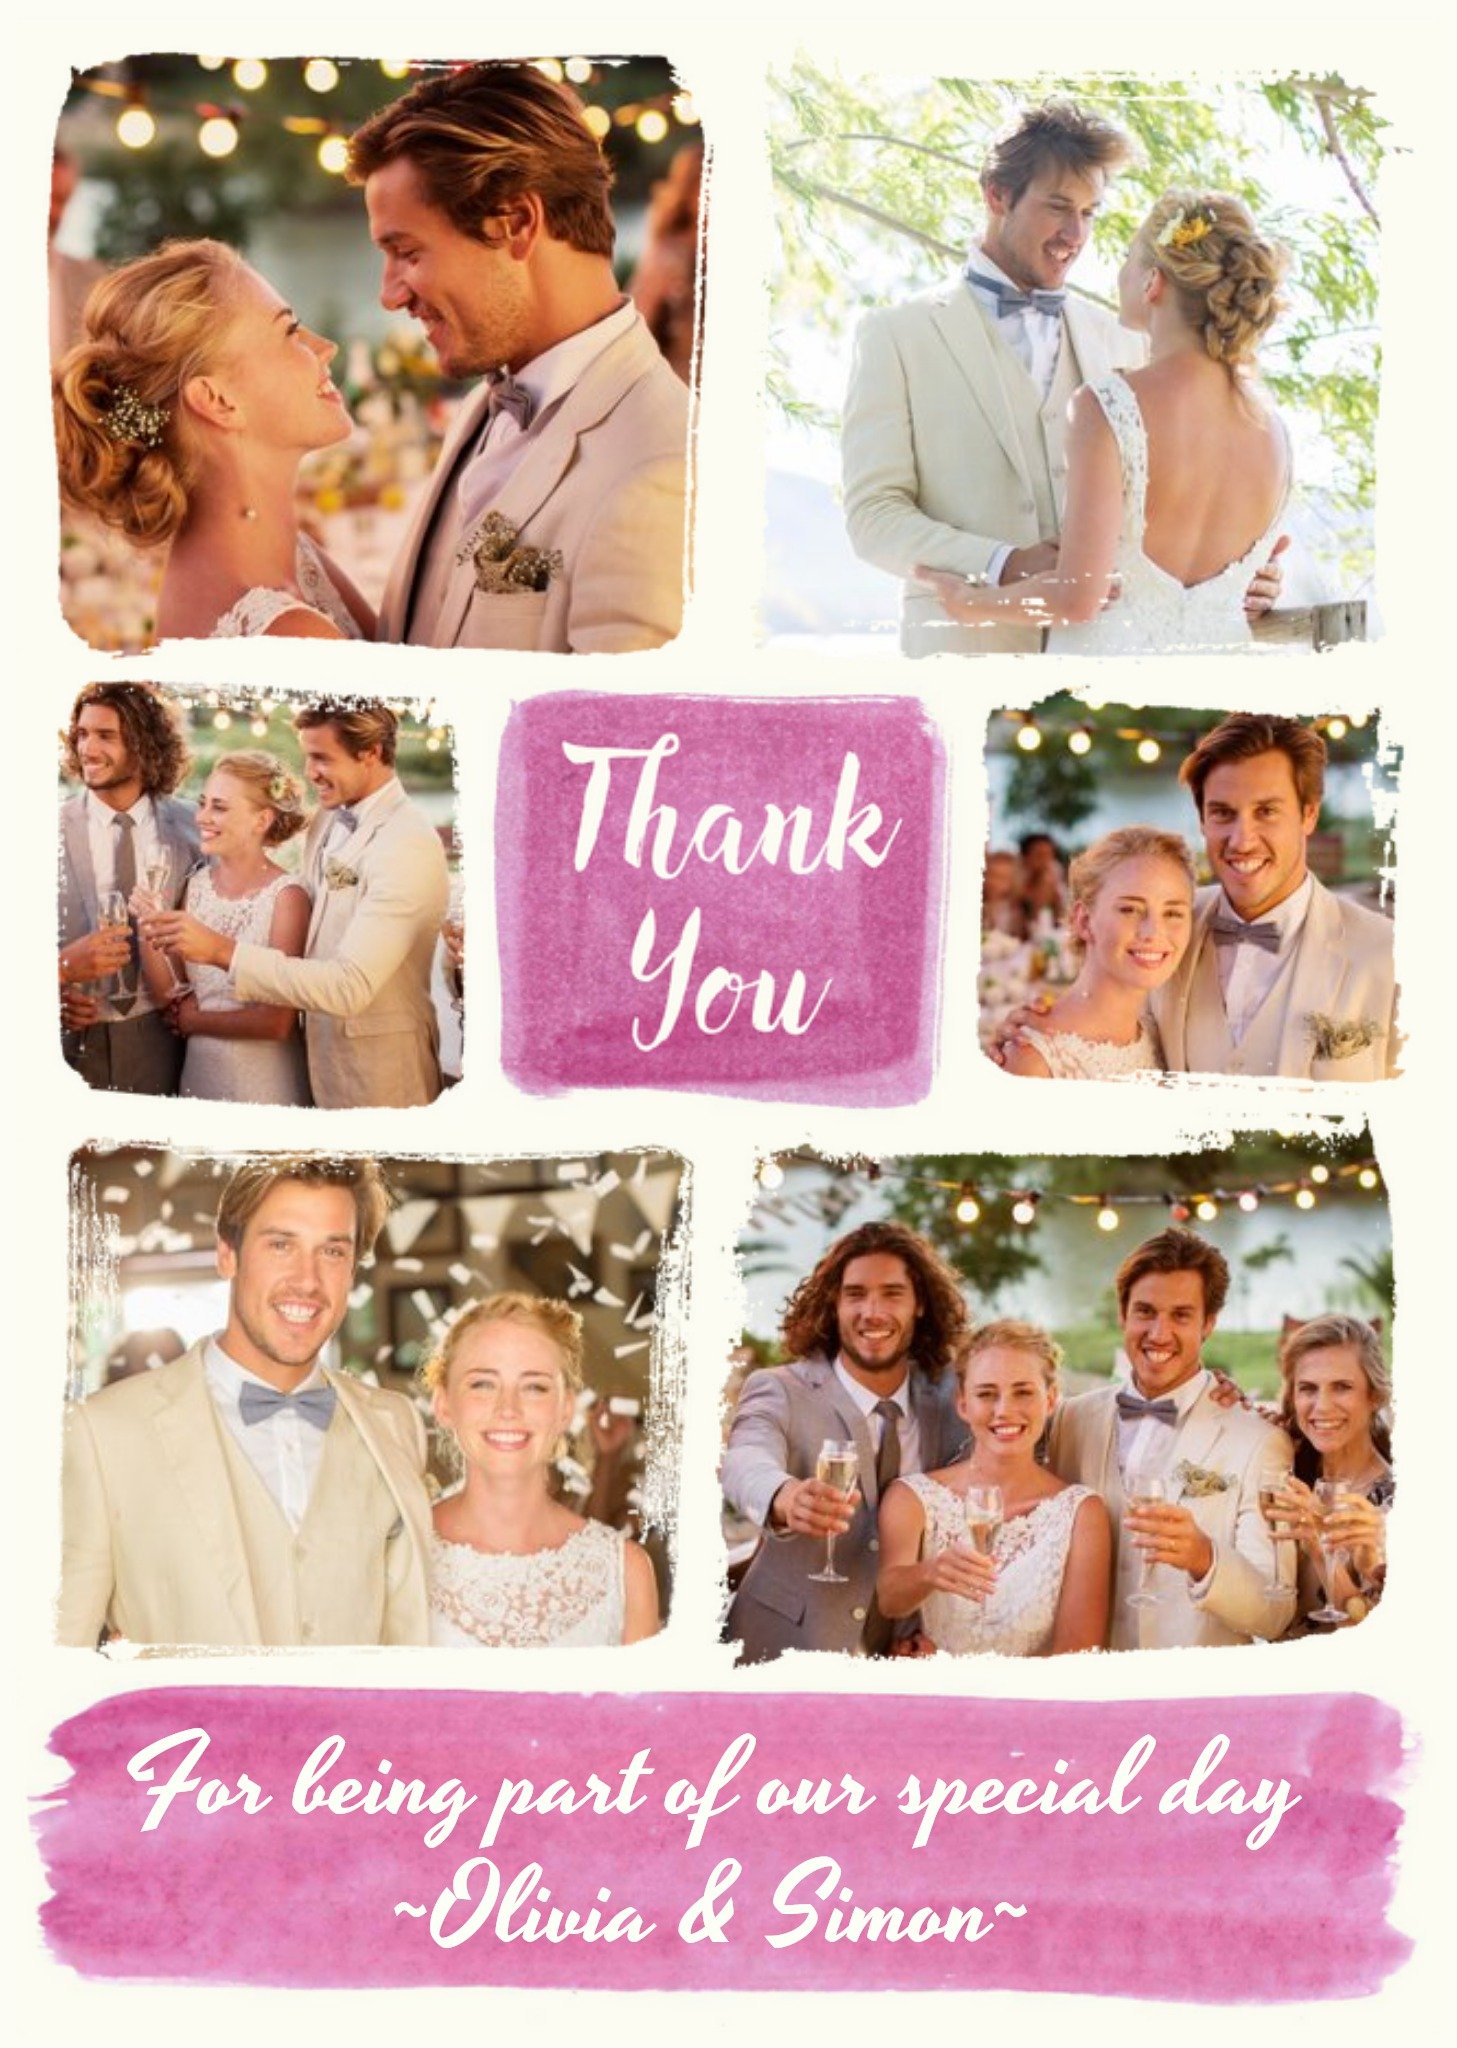 Moonpig Wedding Thank You Postcard. Thank You For Being Part Of Our Special Day ~Olivia & Simon~ Pho